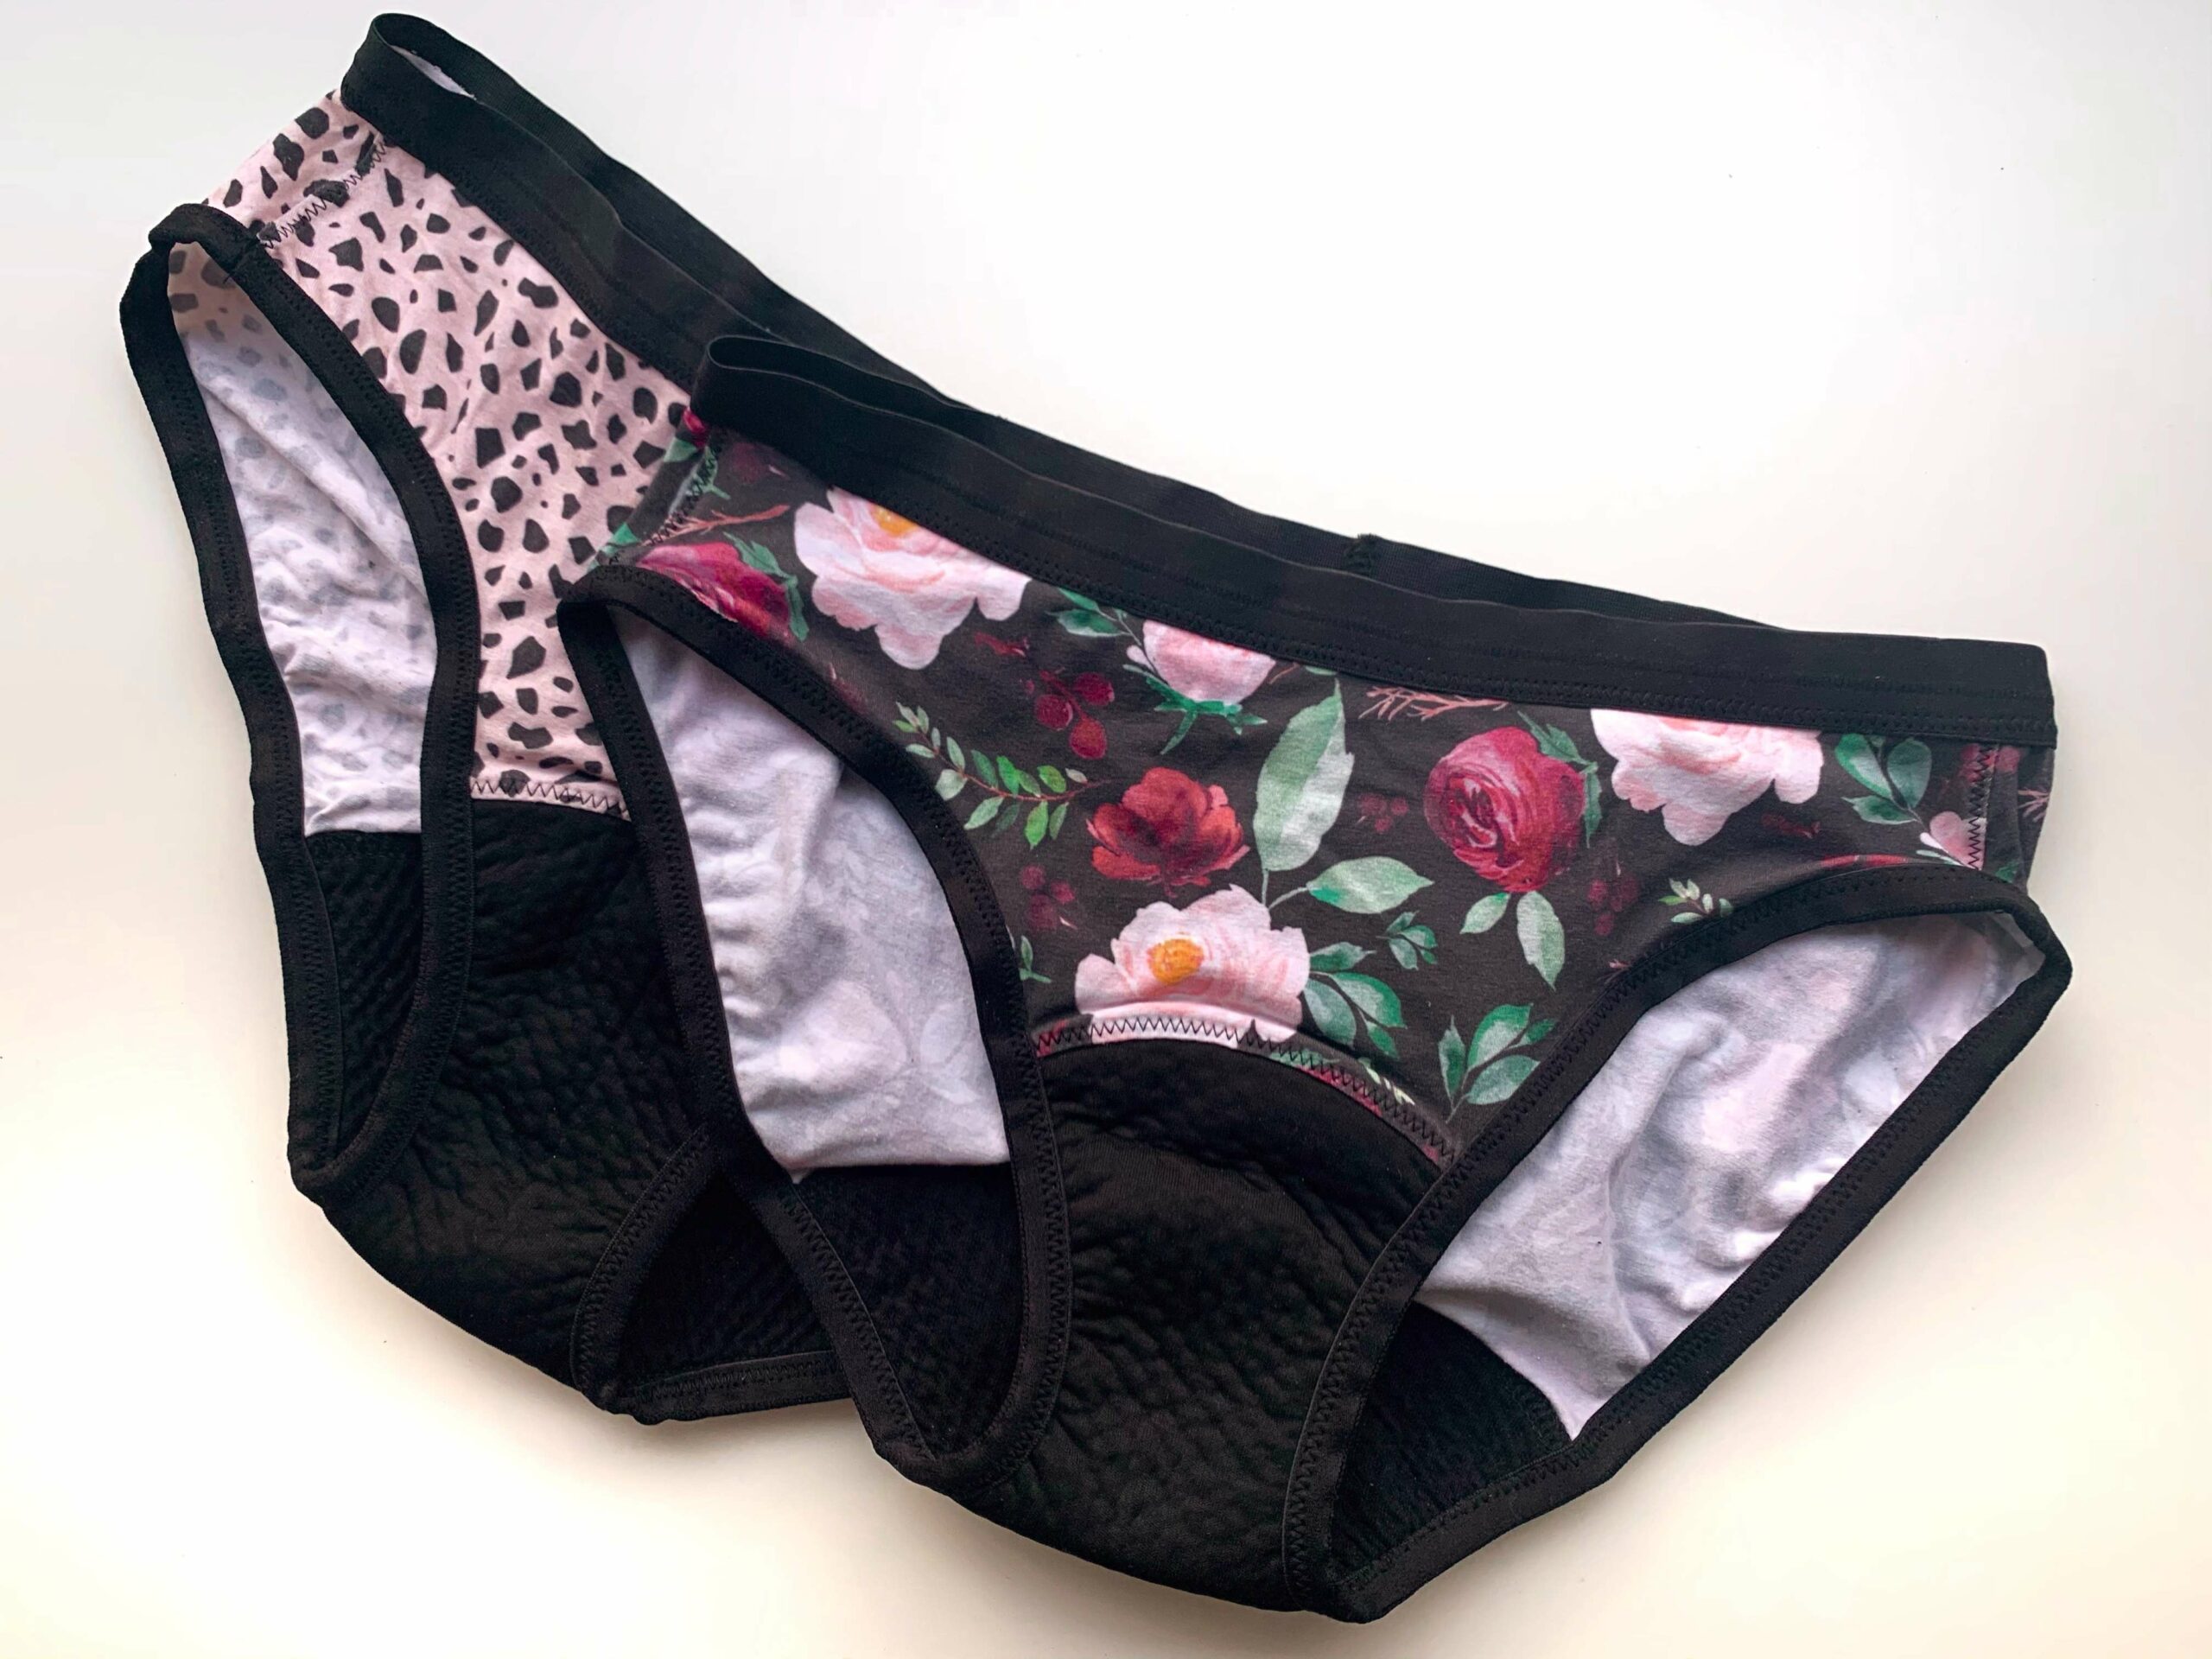 Two pairs of finished reusable period underwear